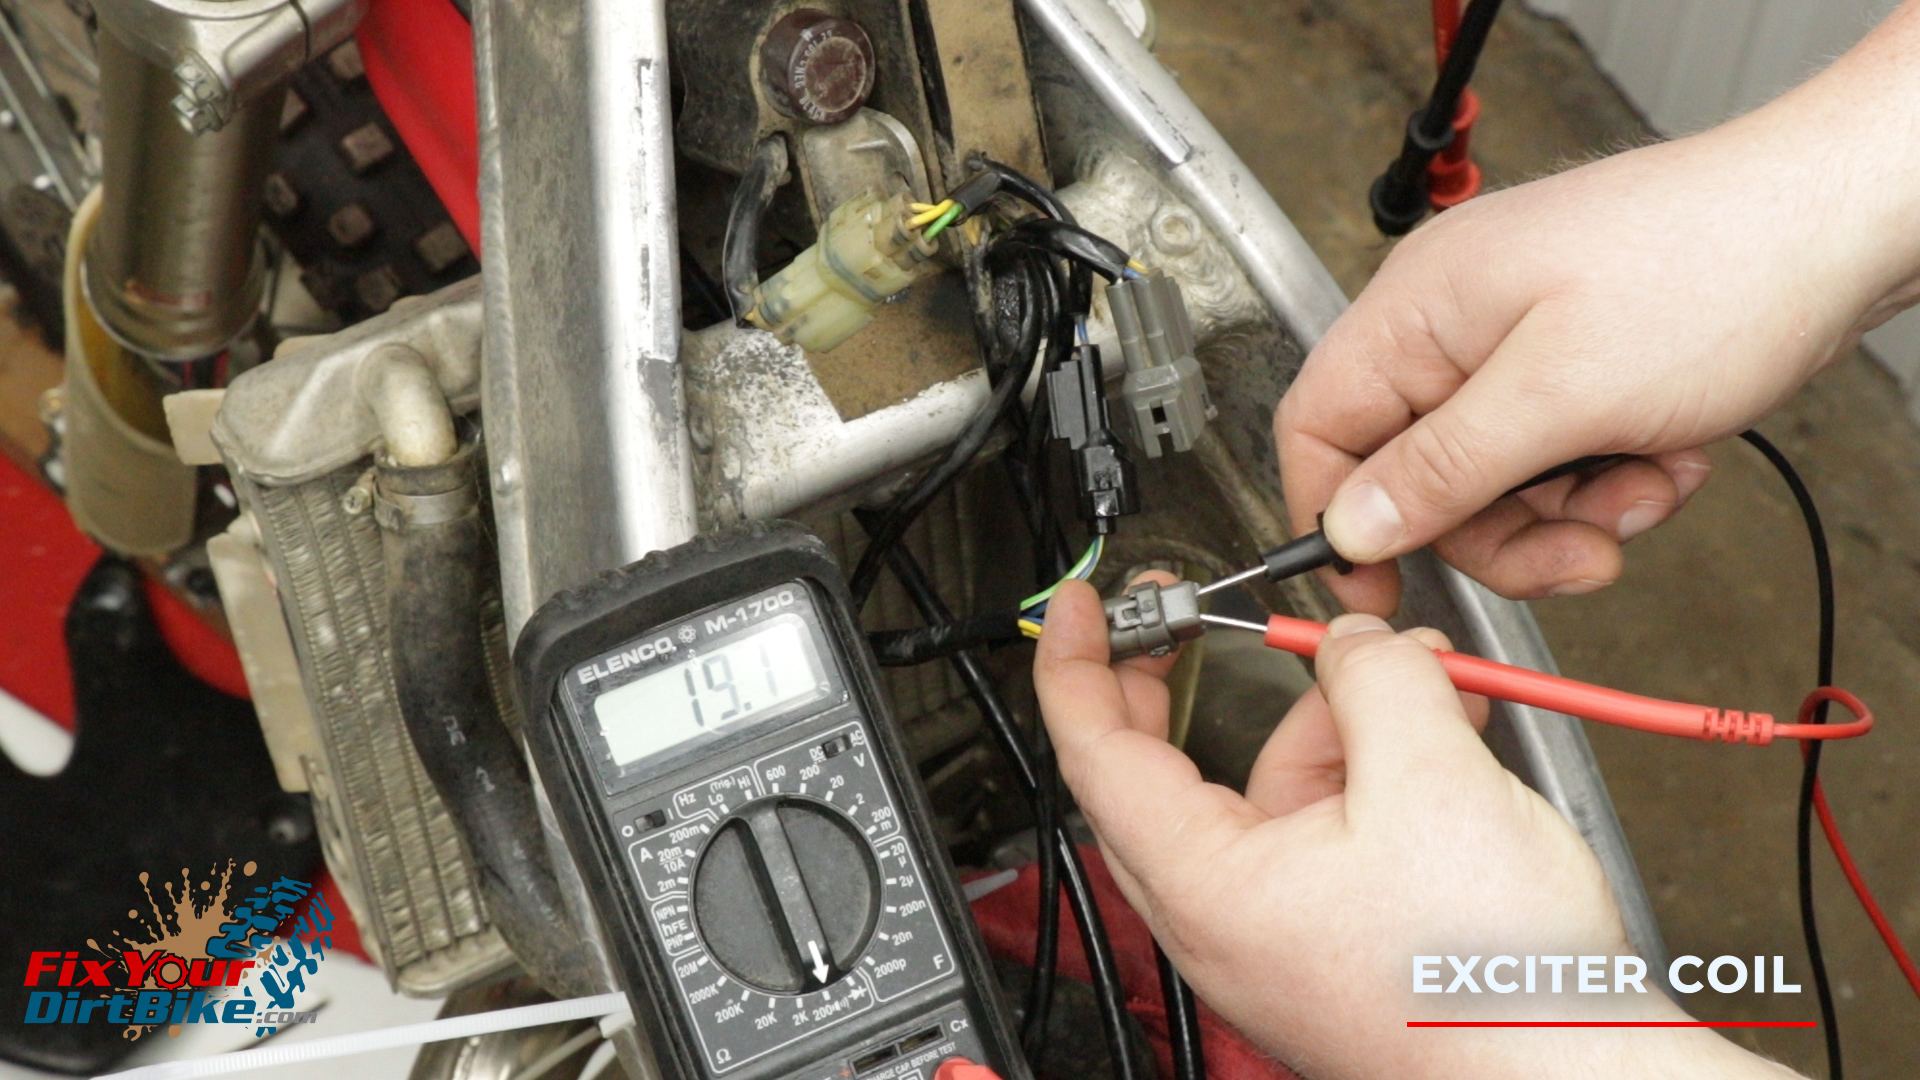 Test The Exciter Coil Resistance Between The Blue And White Wire Terminals